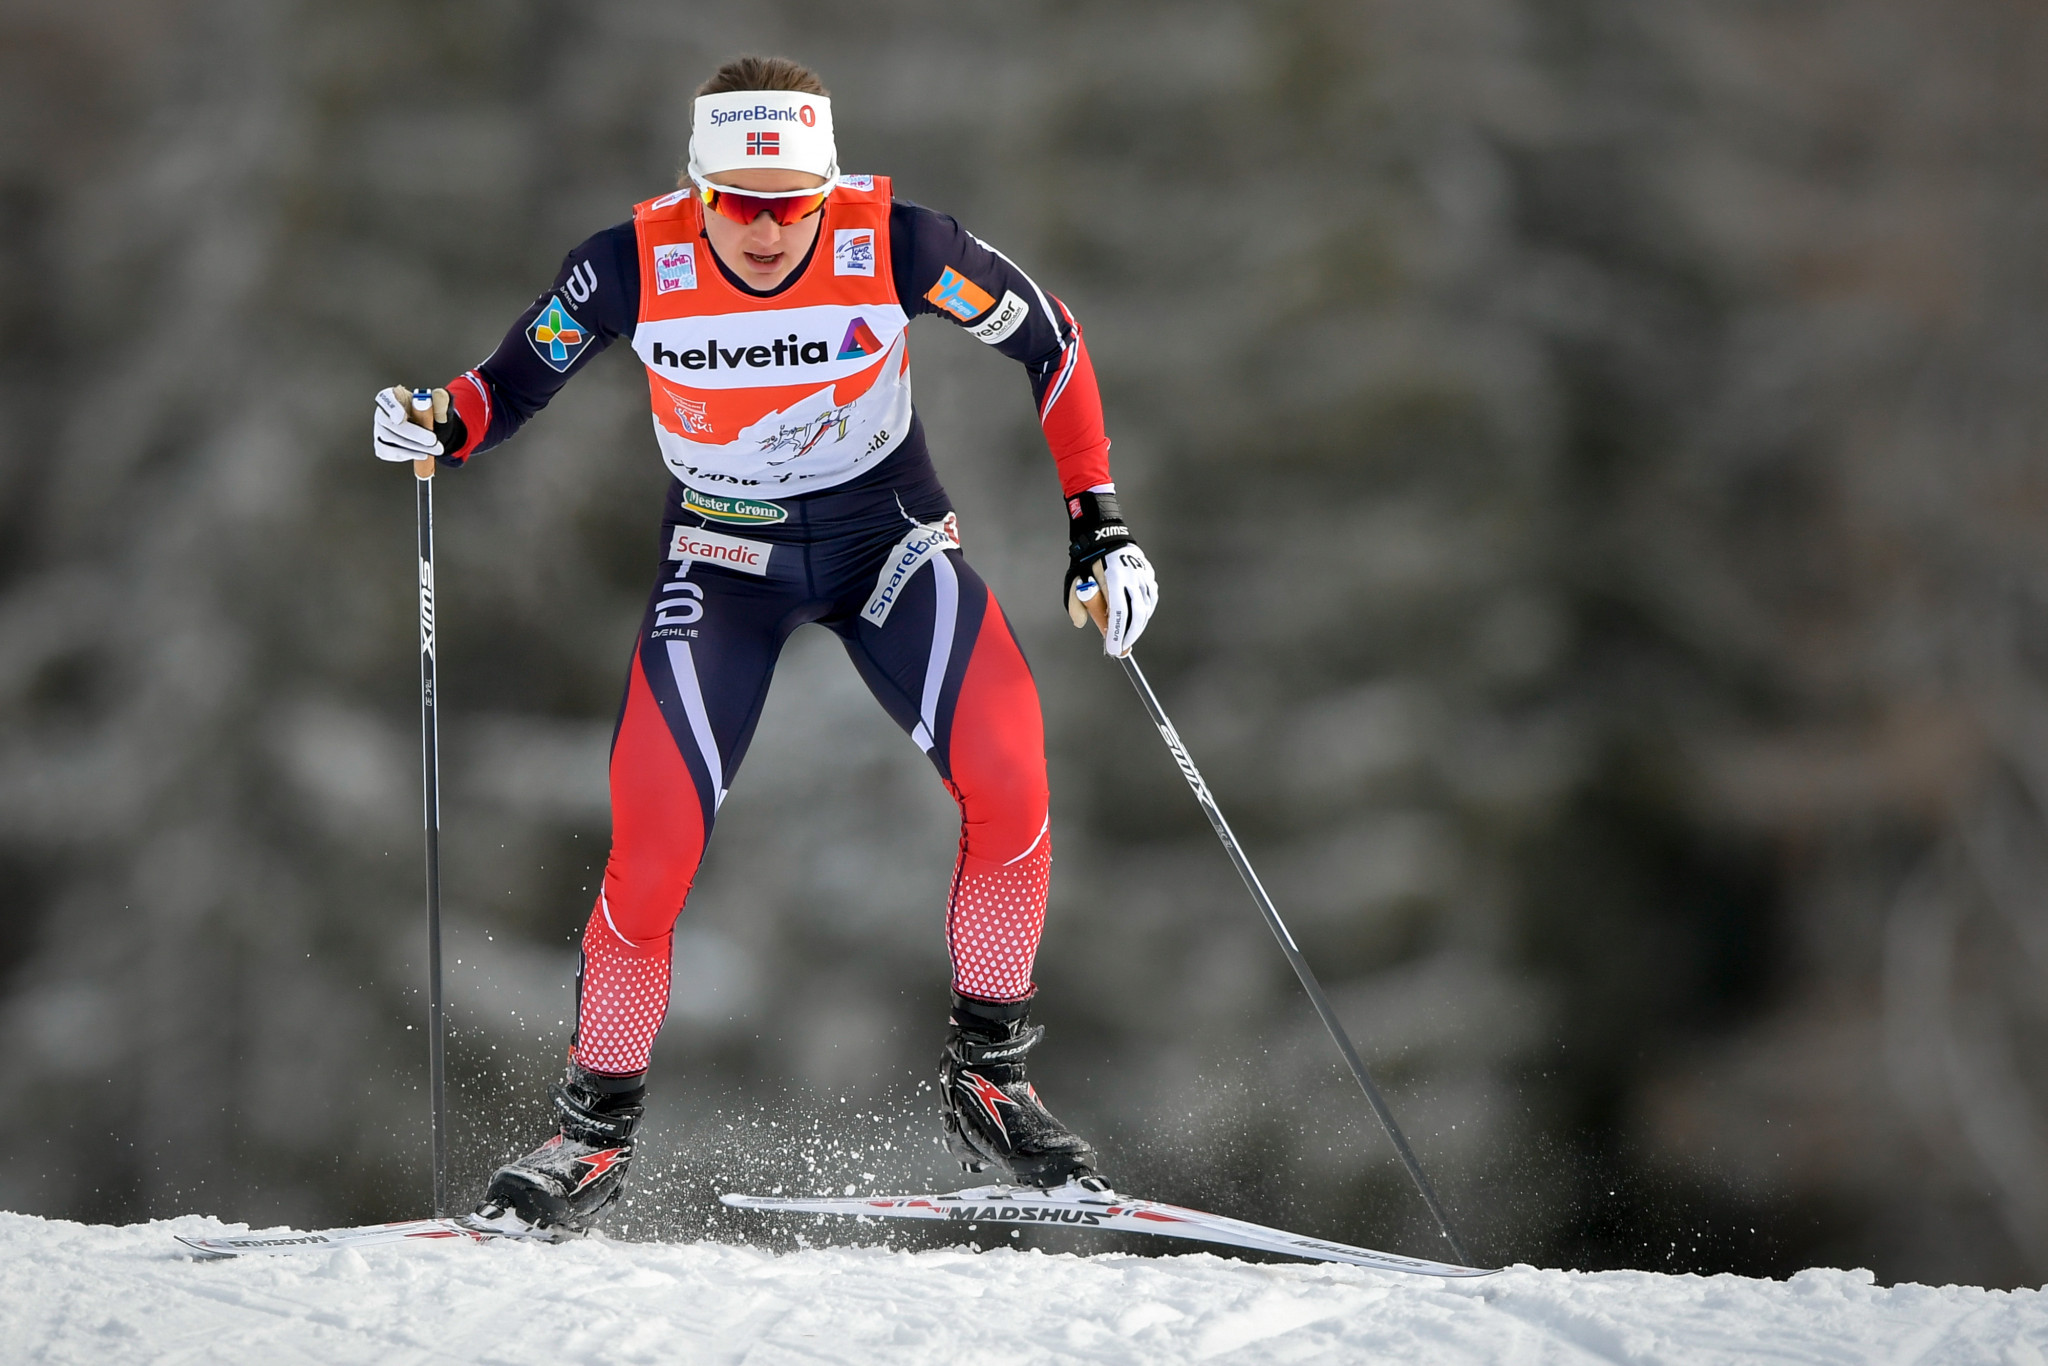 Ingvild Flugstad Østberg heads the women's standings prior to the fourth race ©Getty Images